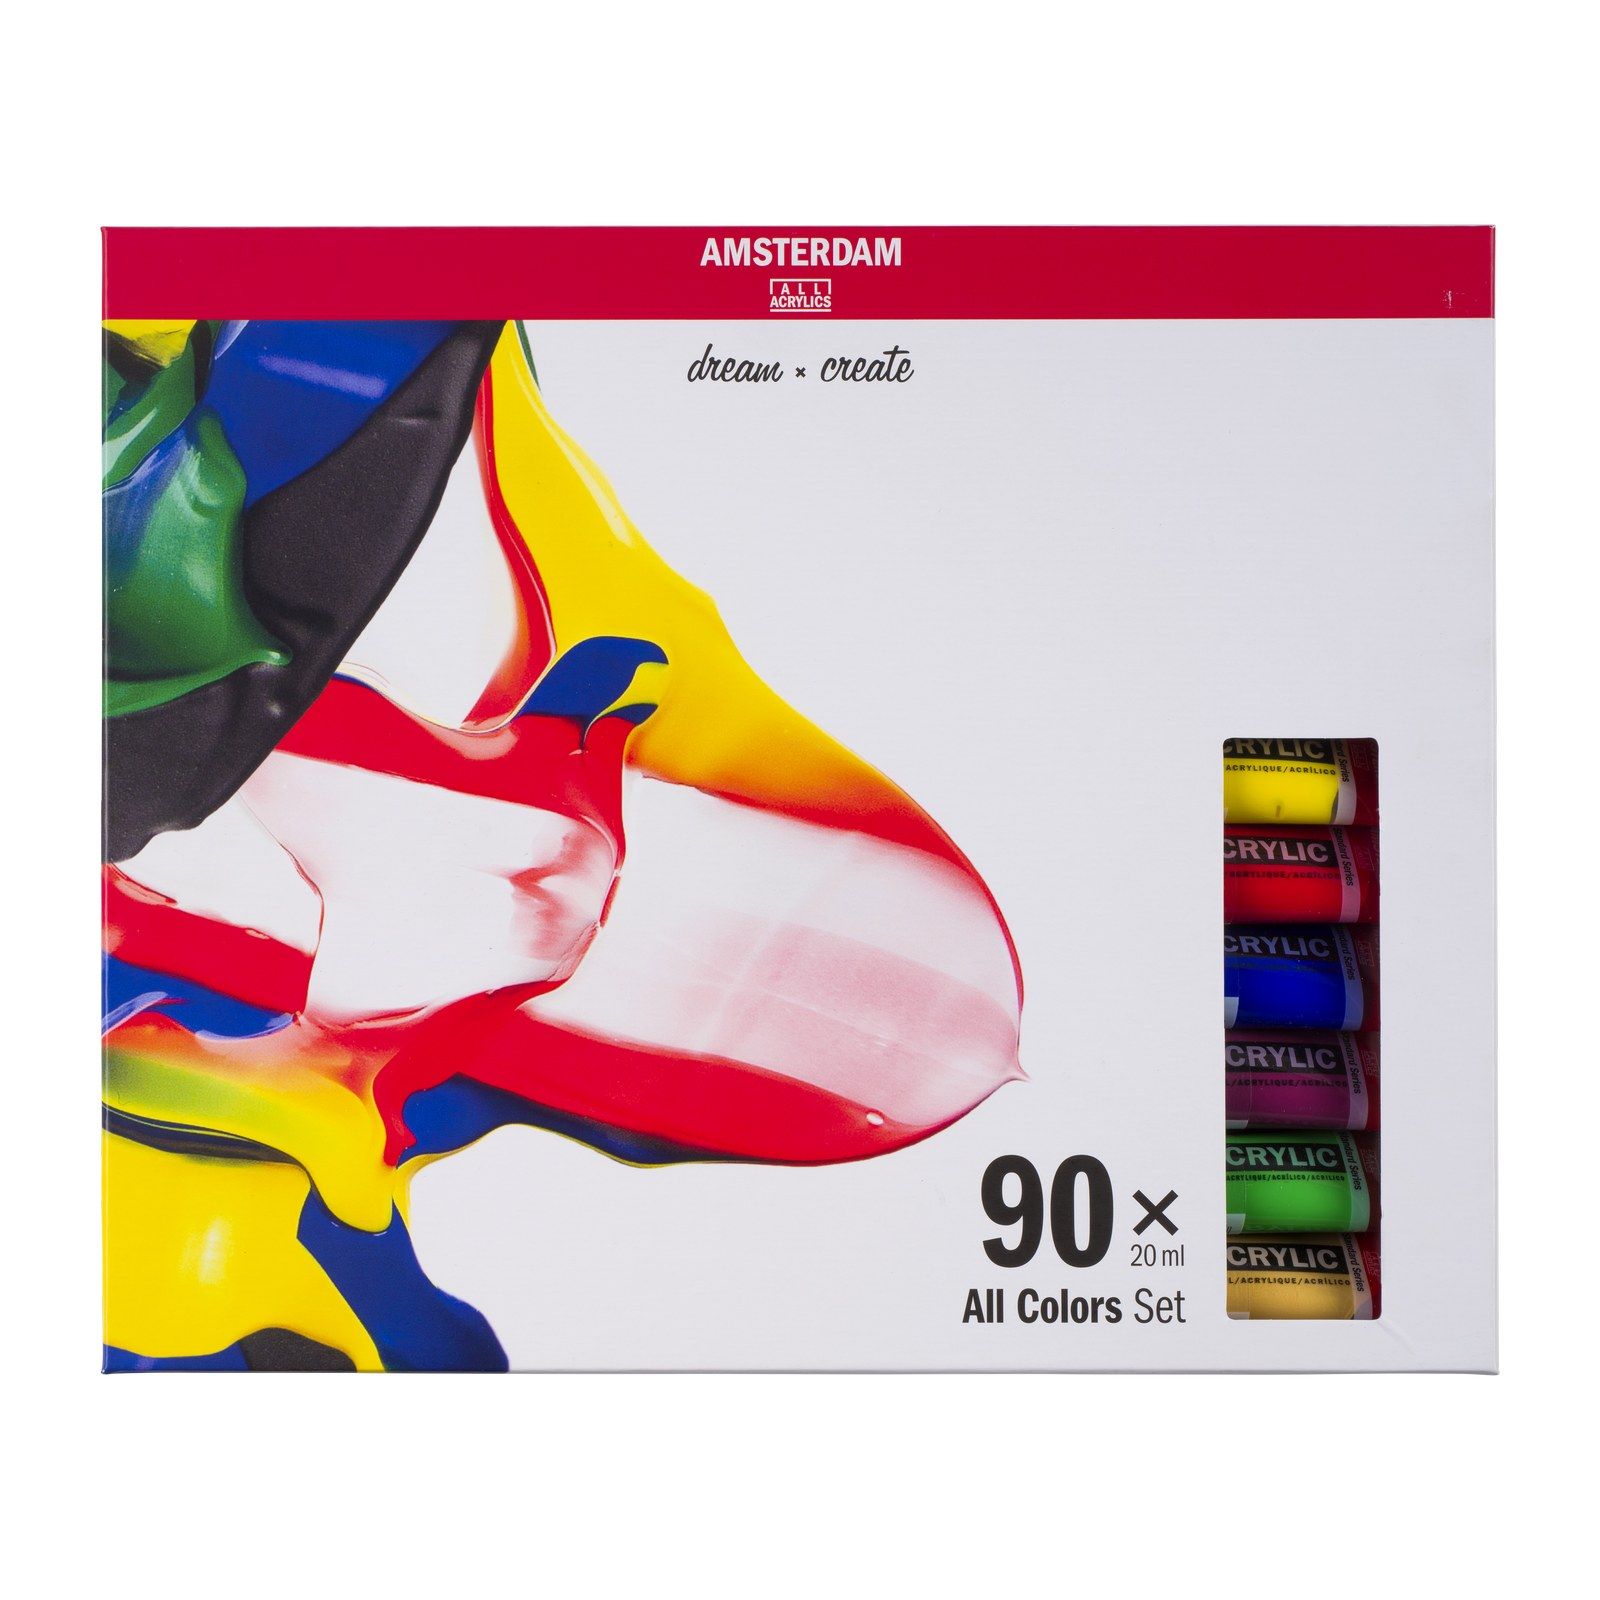 Amsterdam • Standard Series Acrylic Paint Complete Collection Set 90x20ml